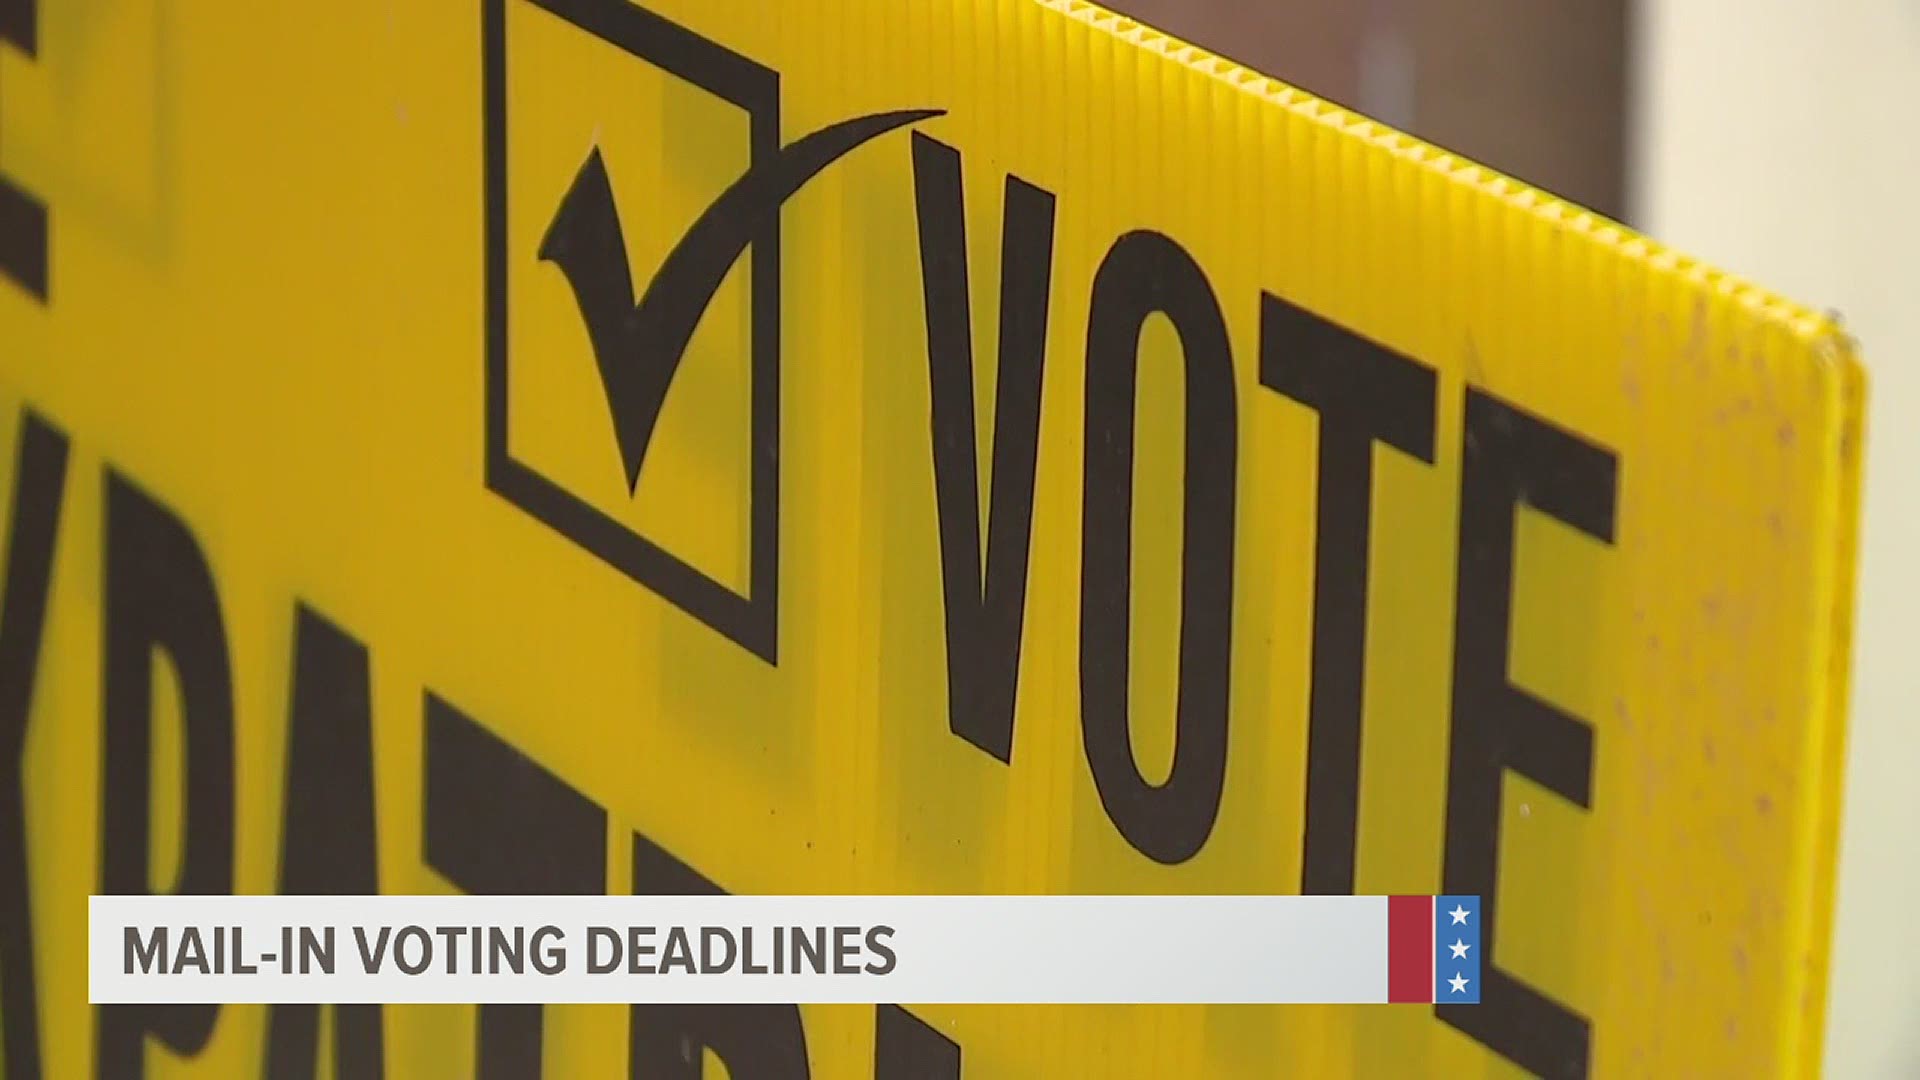 The U.S. Postal Service recommends voters mail in their ballots at least one week before the state's deadline.